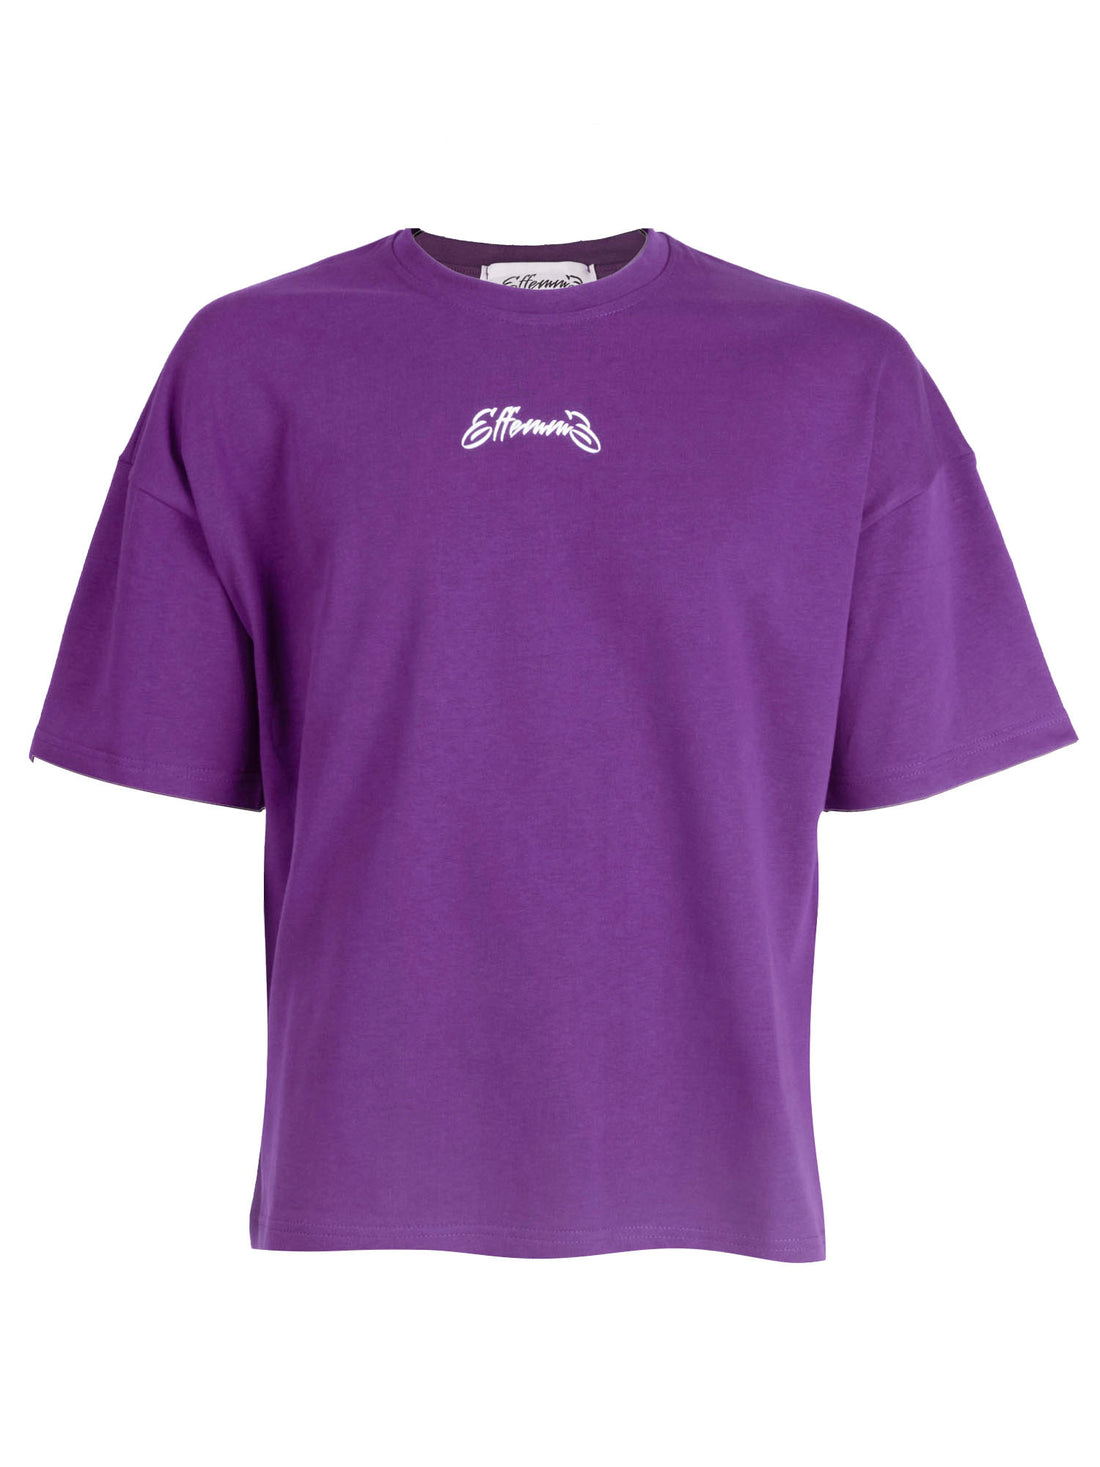 Tee Number 96 Lilac